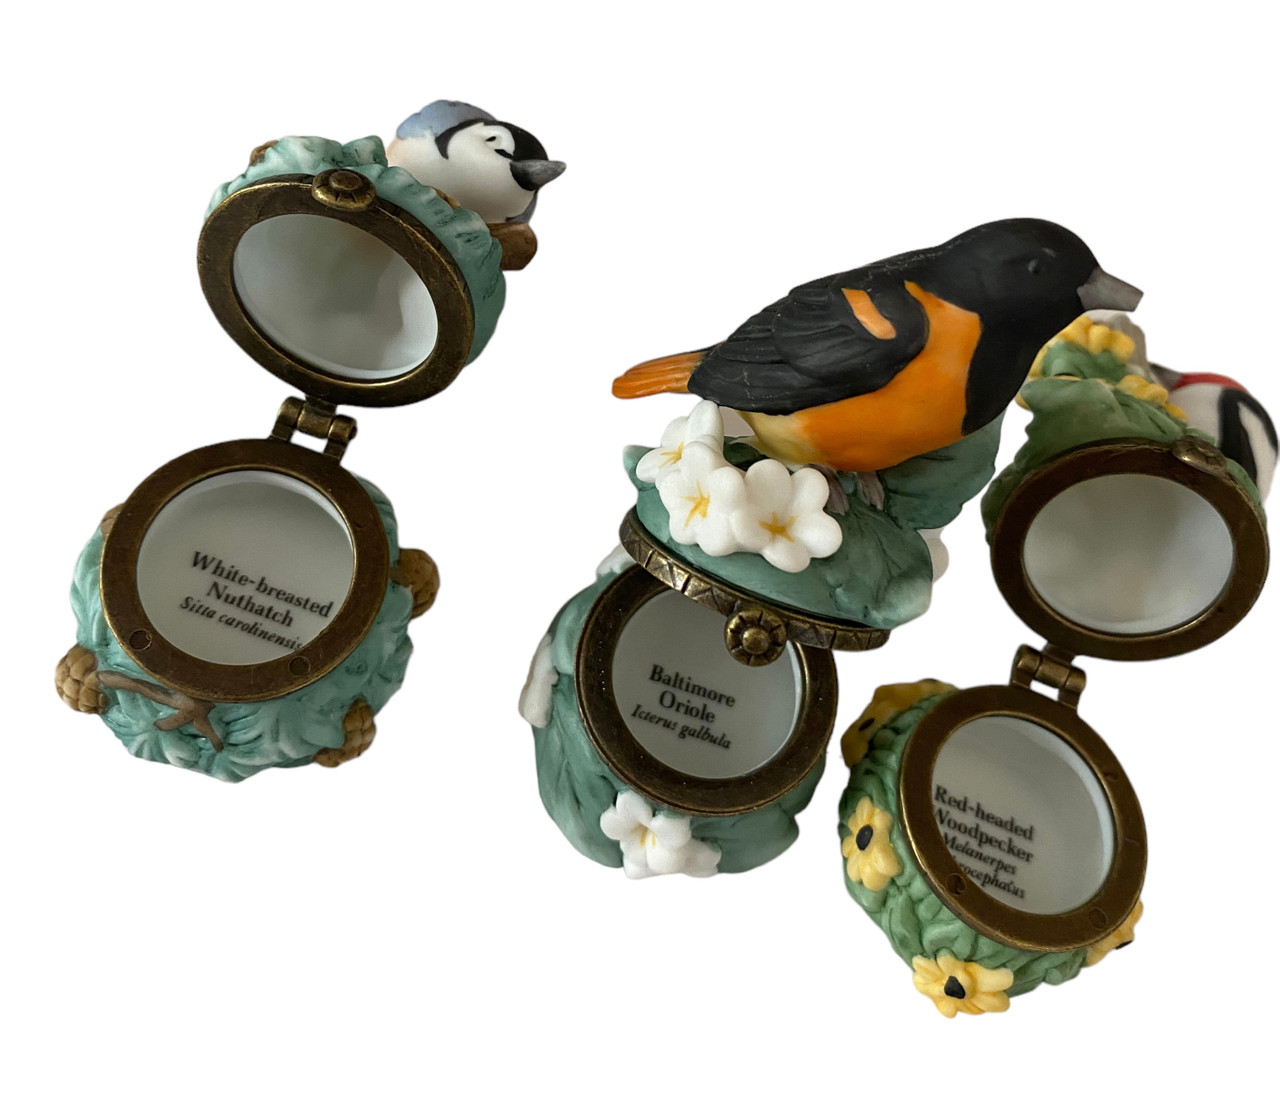 PHB Midwest of Cannon Falls Hinged Boxes - SONG BIRD SERIES Set of 3